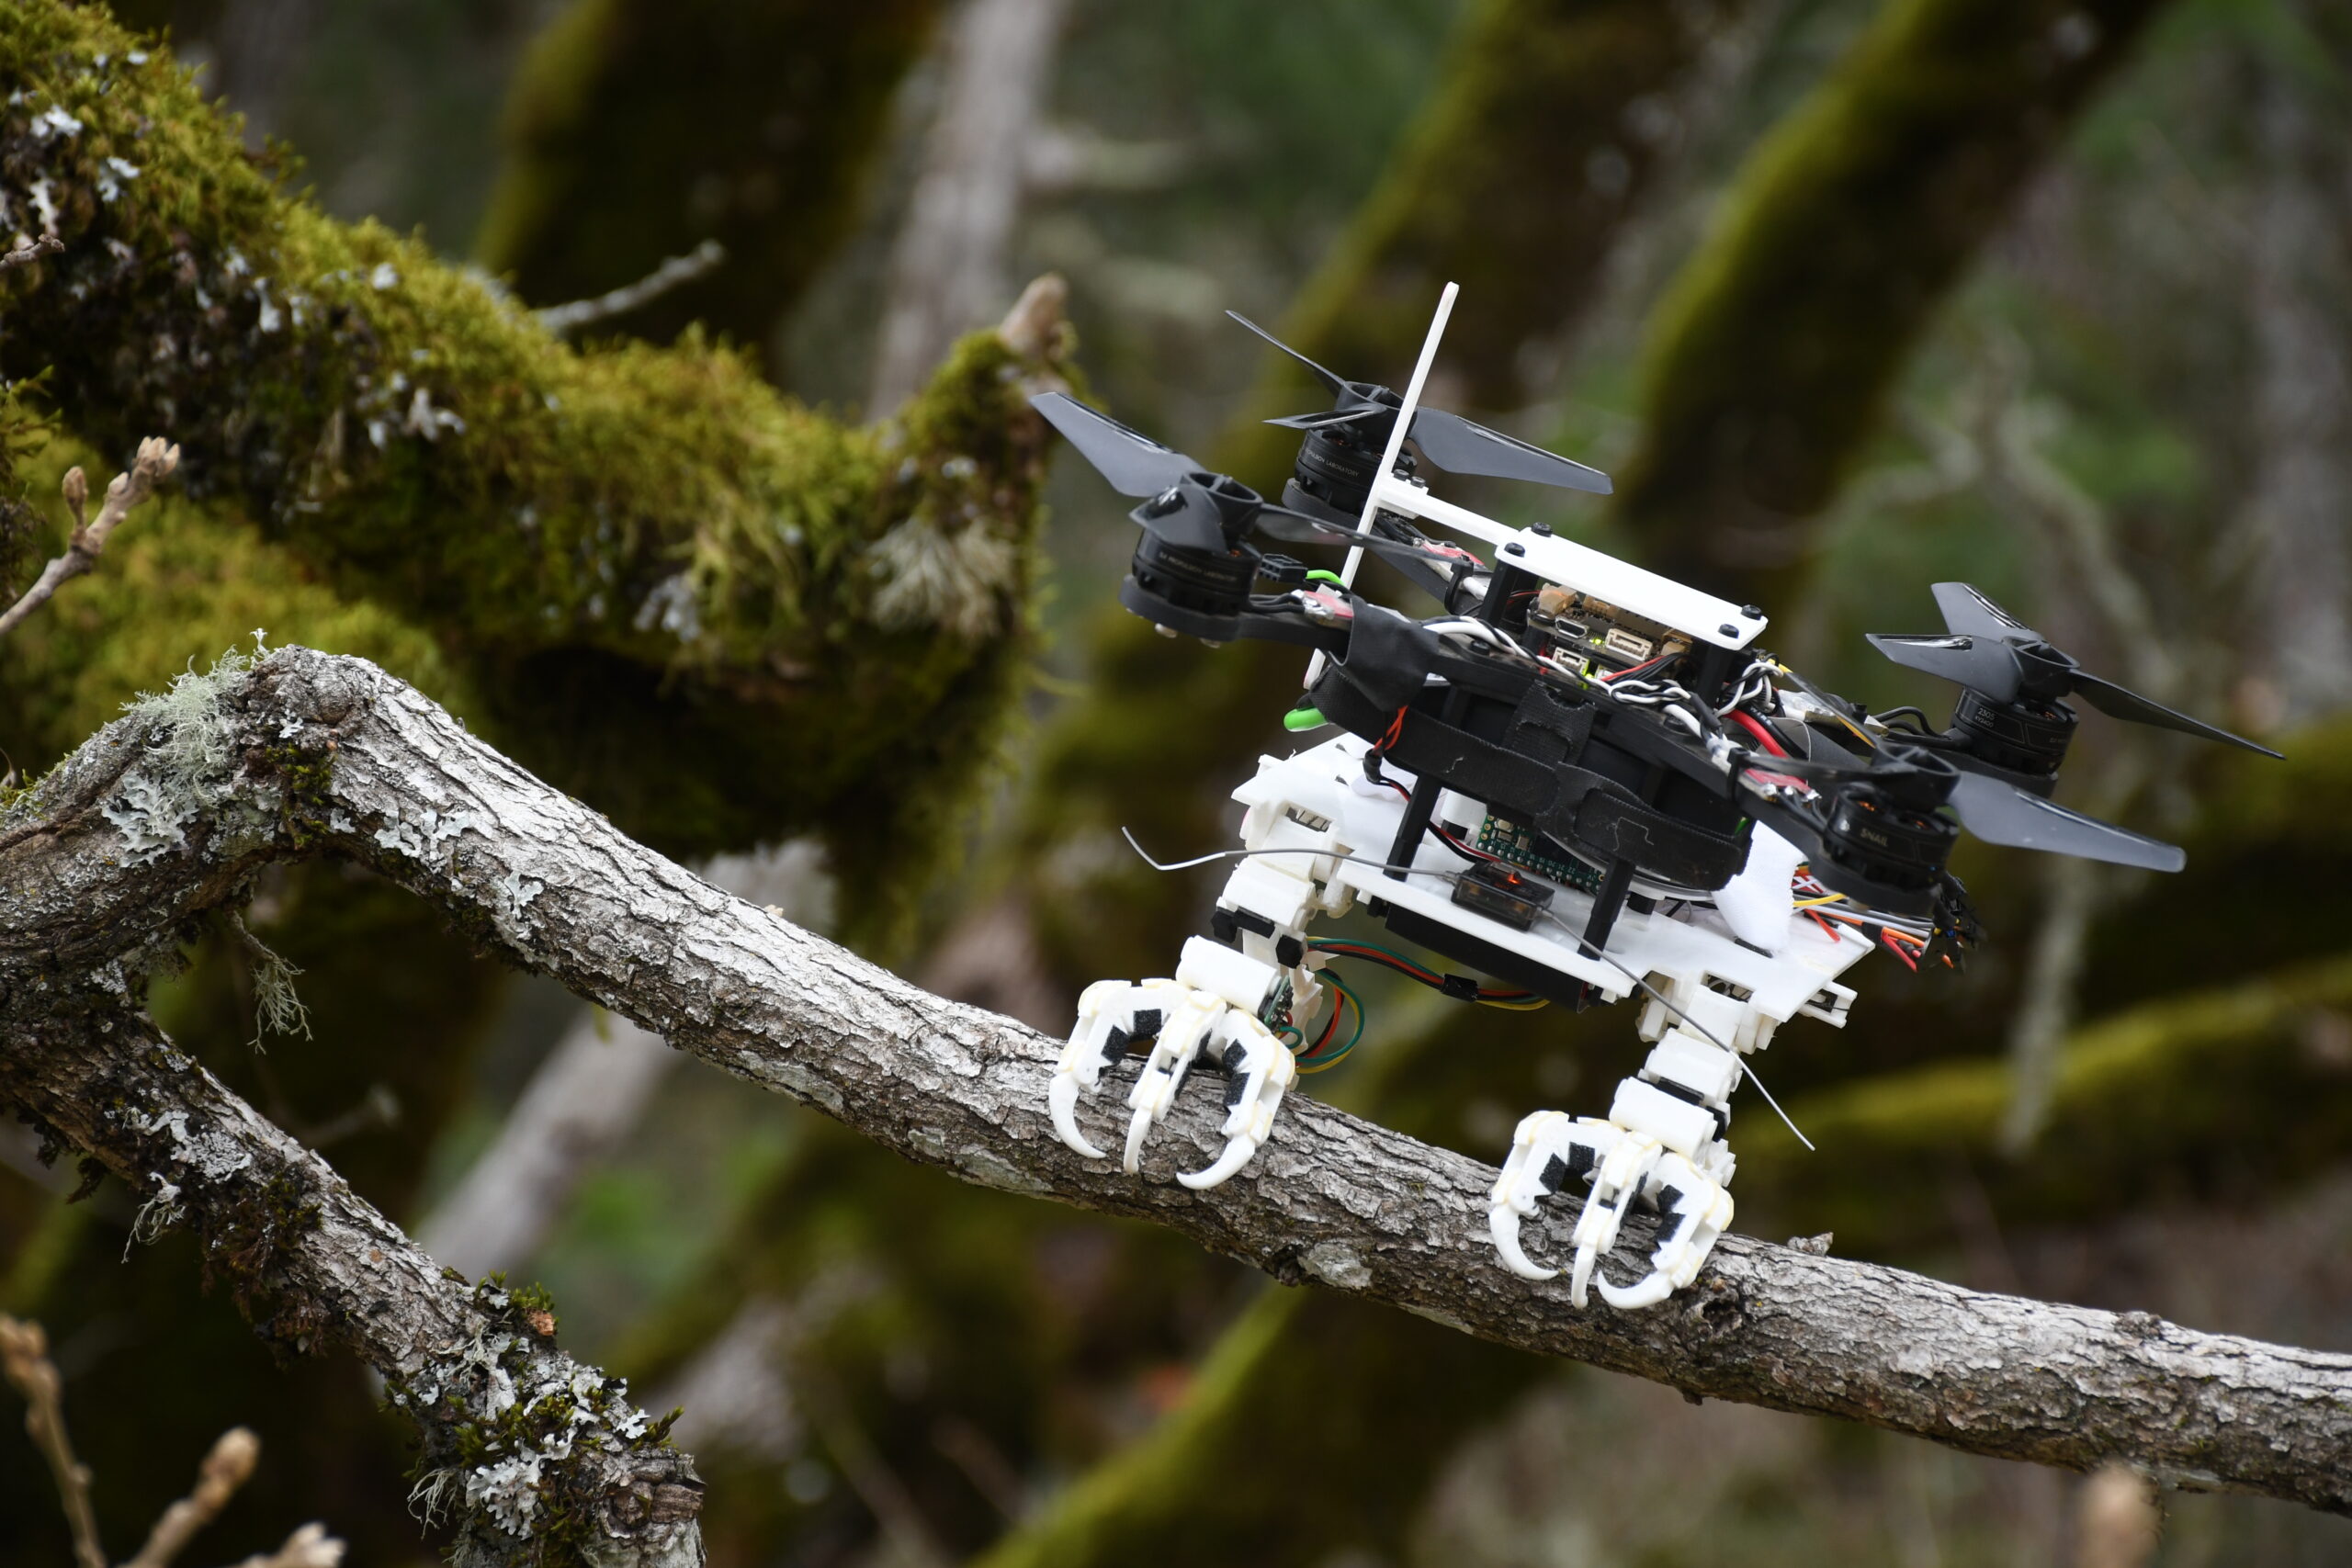 This bird-legged quadcopter can easily perch in the treetops